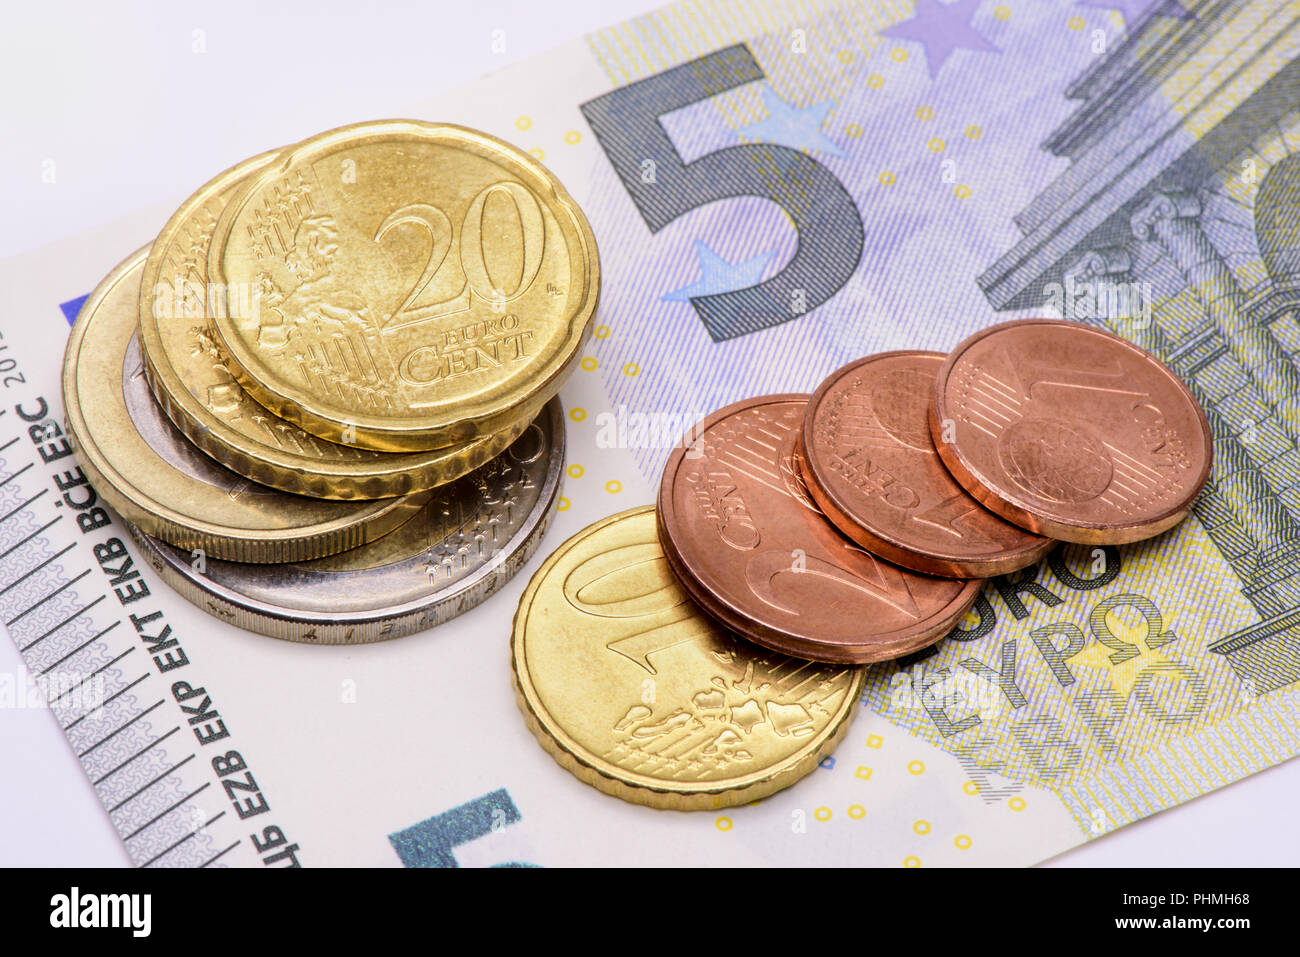 minimum wage in germany is 8,84 Euros Stock Photo